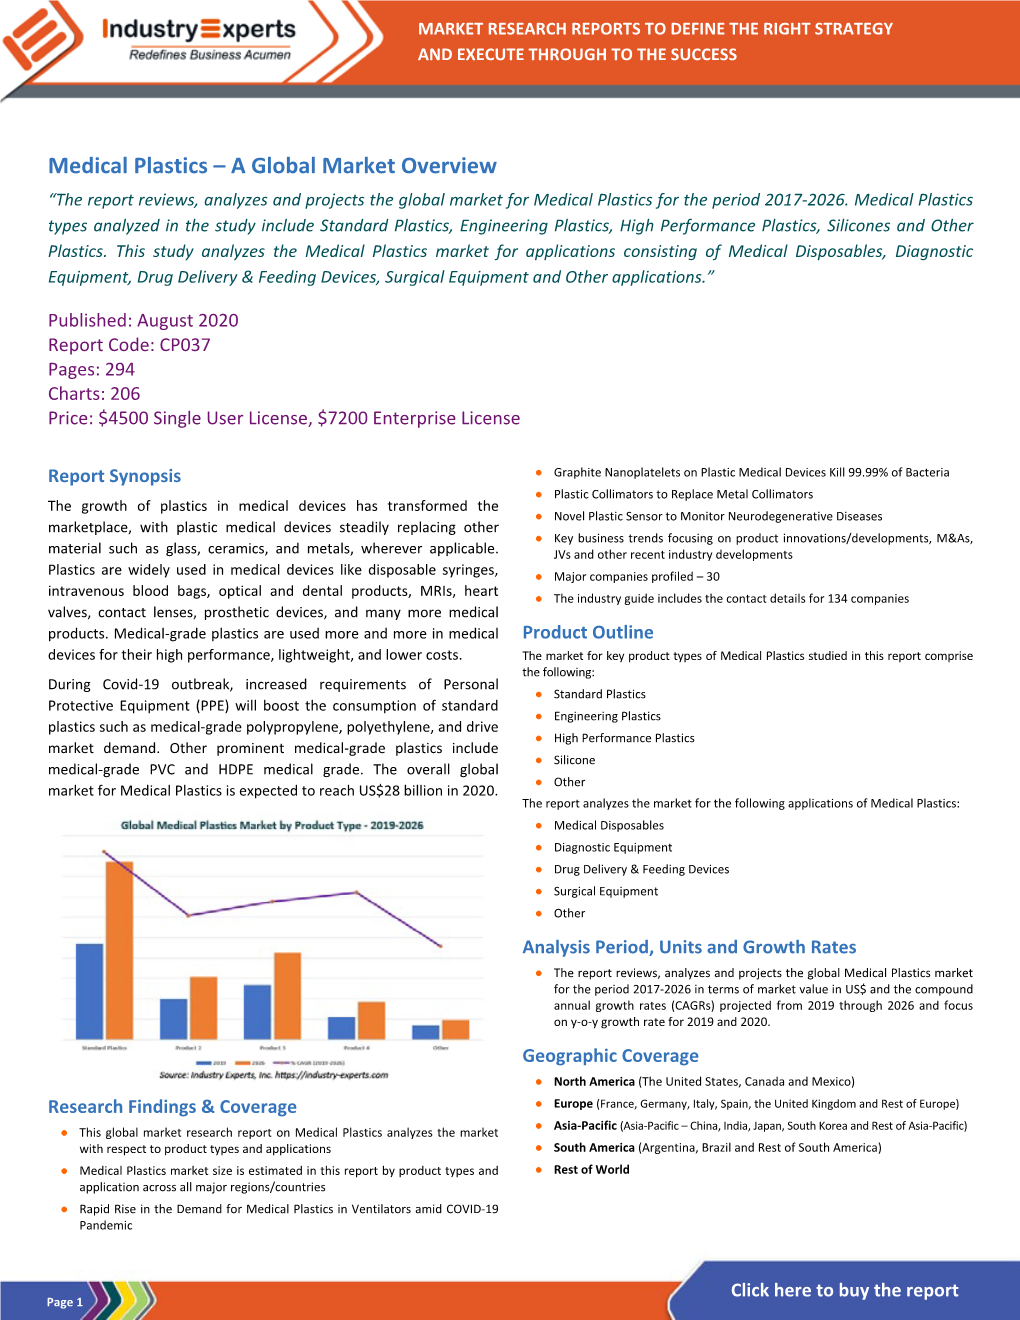 Medical Plastics – a Global Market Overview “The Report Reviews, Analyzes and Projects the Global Market for Medical Plastics for the Period 2017-2026